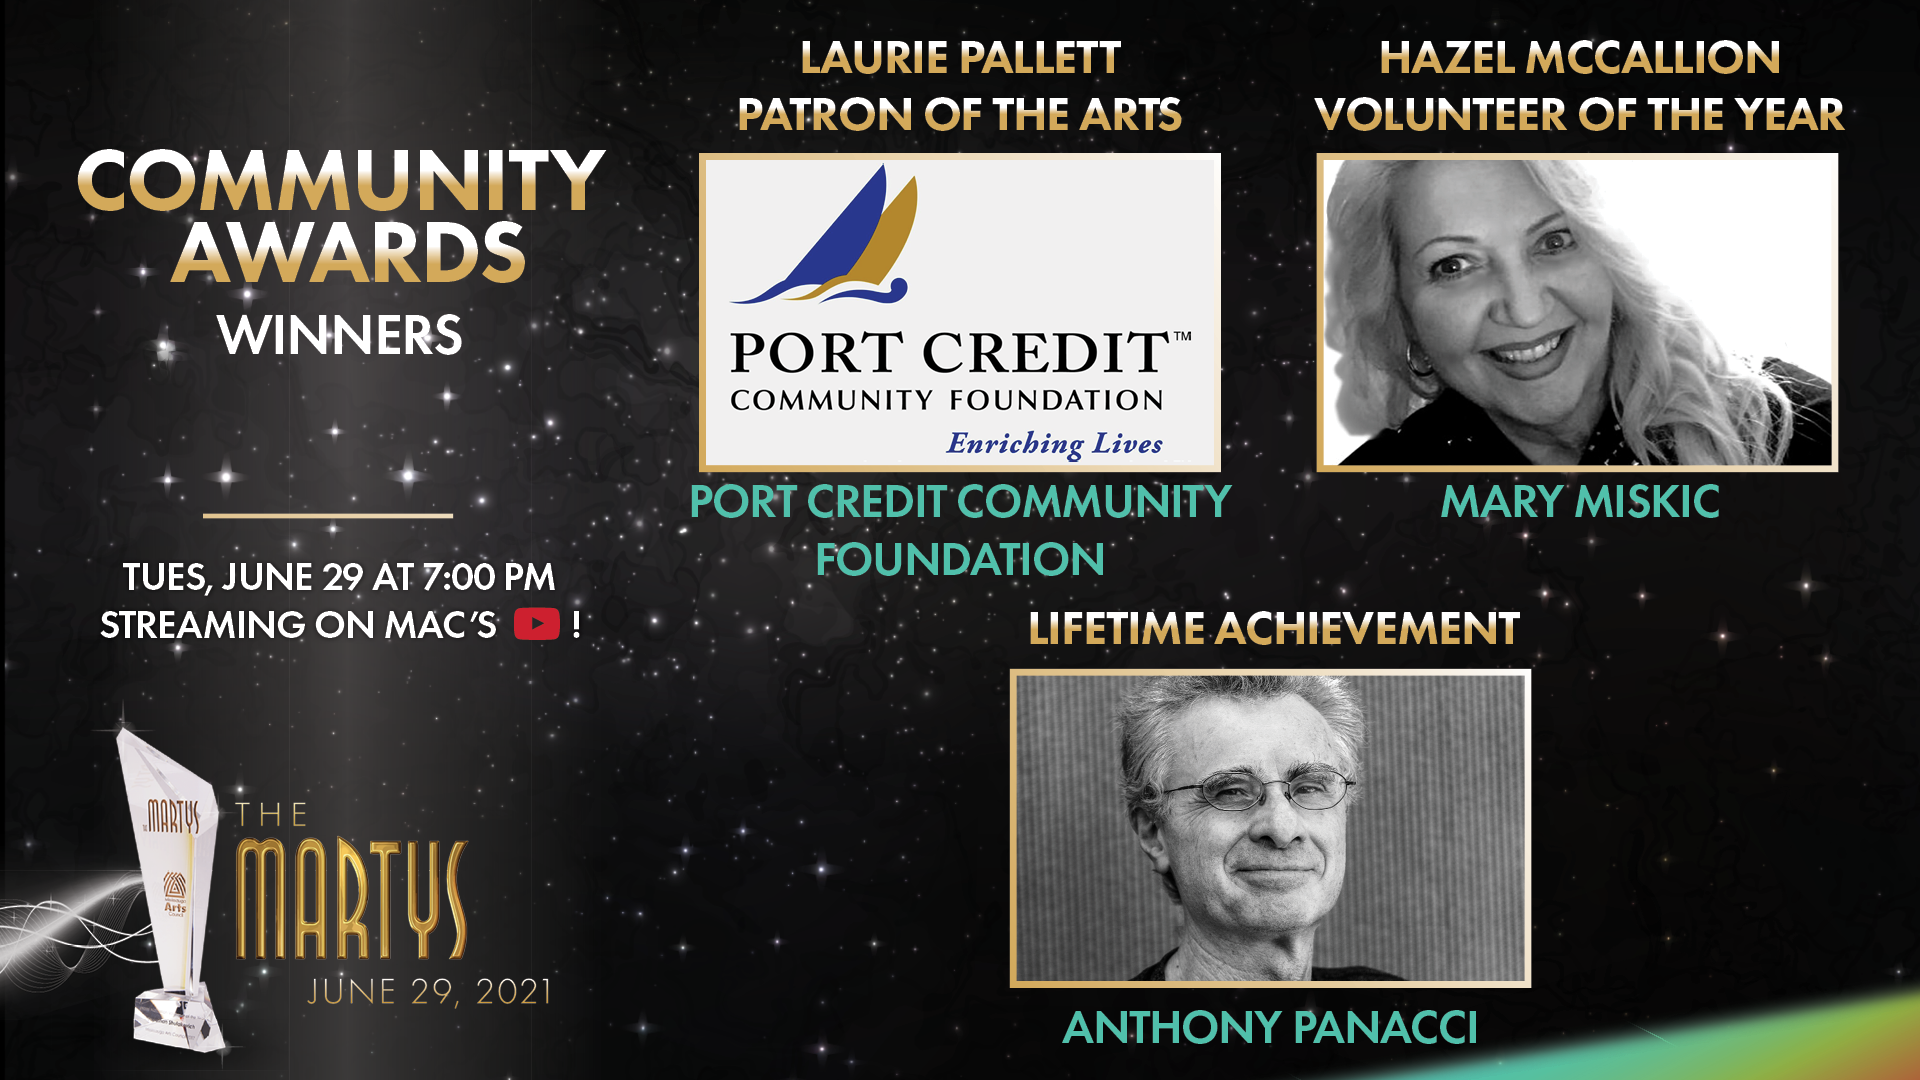 Announcing our 2021 MARTY Awards Finalists and Community Award Winners